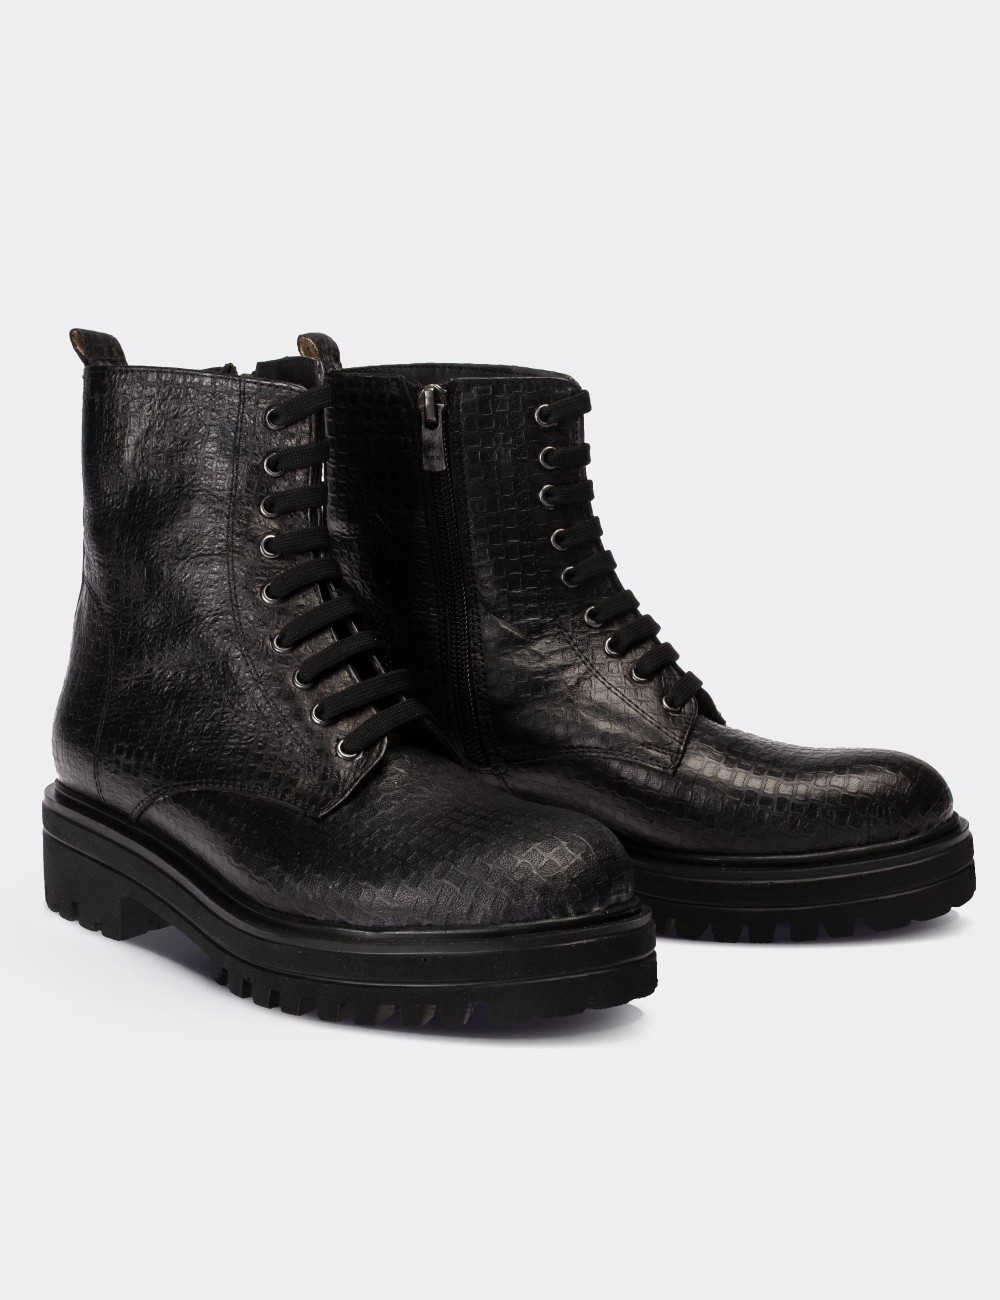 Black  Leather Boots - 01814ZSYHE08